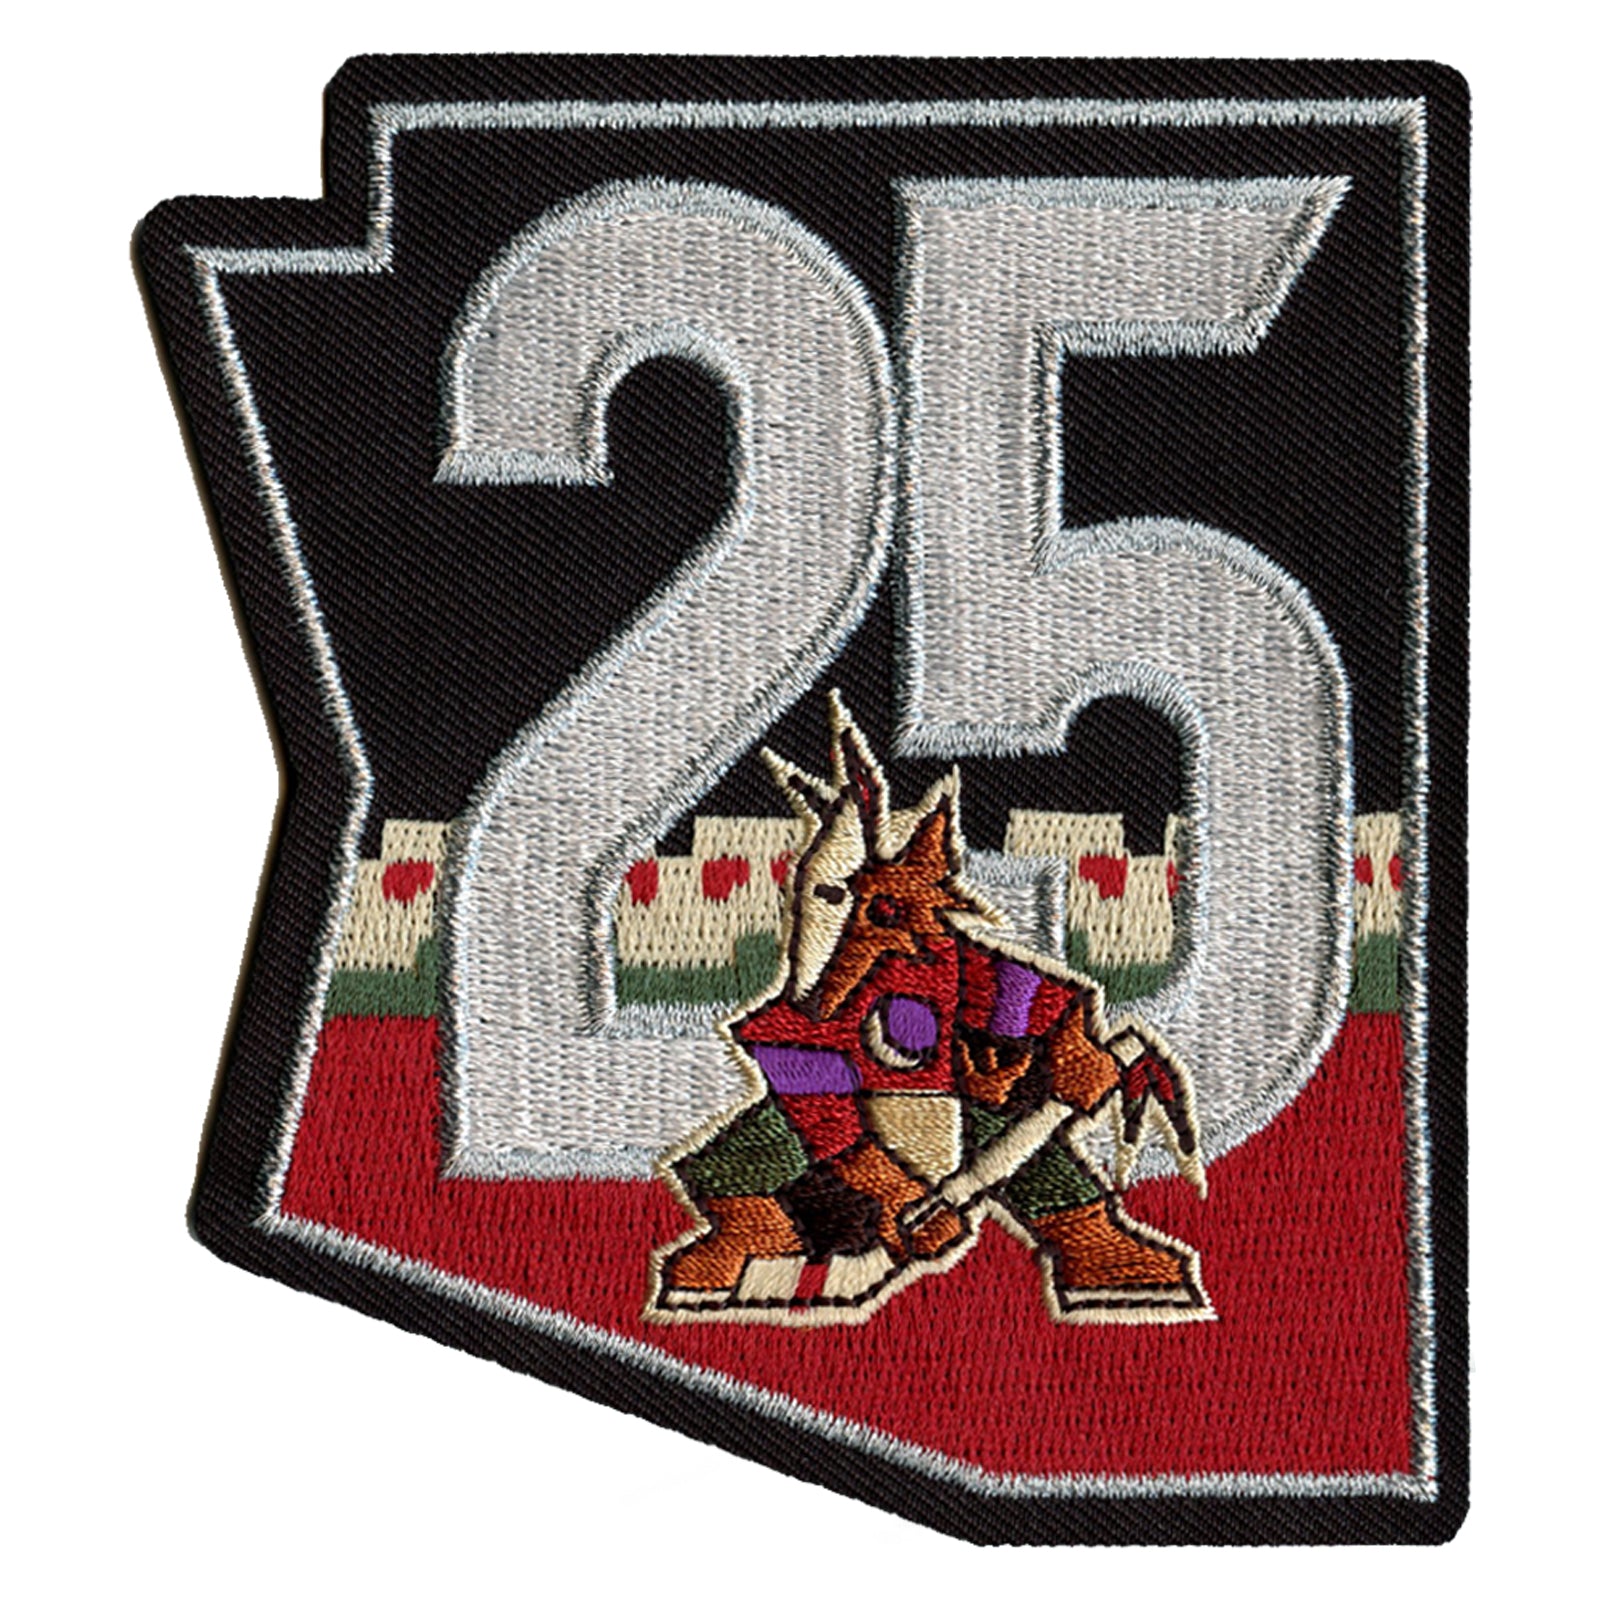 Coyotes celebrate 25th anniversary with jersey patches, center ice logo